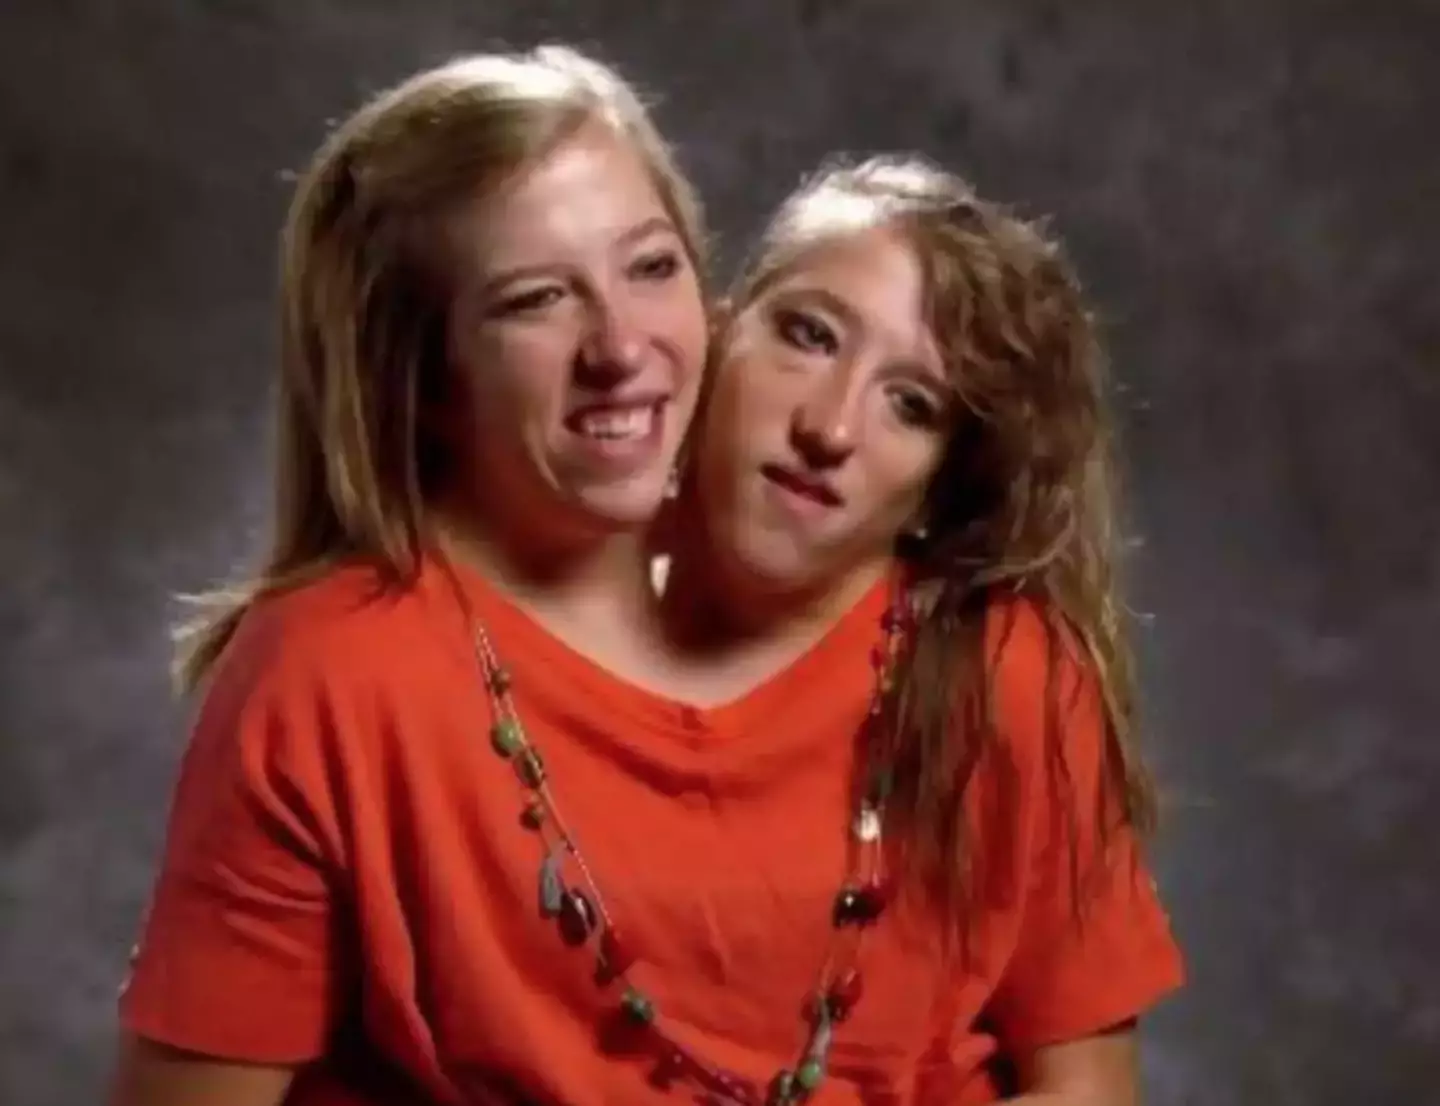 Conjoined twins Abby and Brittany Hensel have been sharing details from Abby's 2021 marriage to Josh Bowling (TLC)